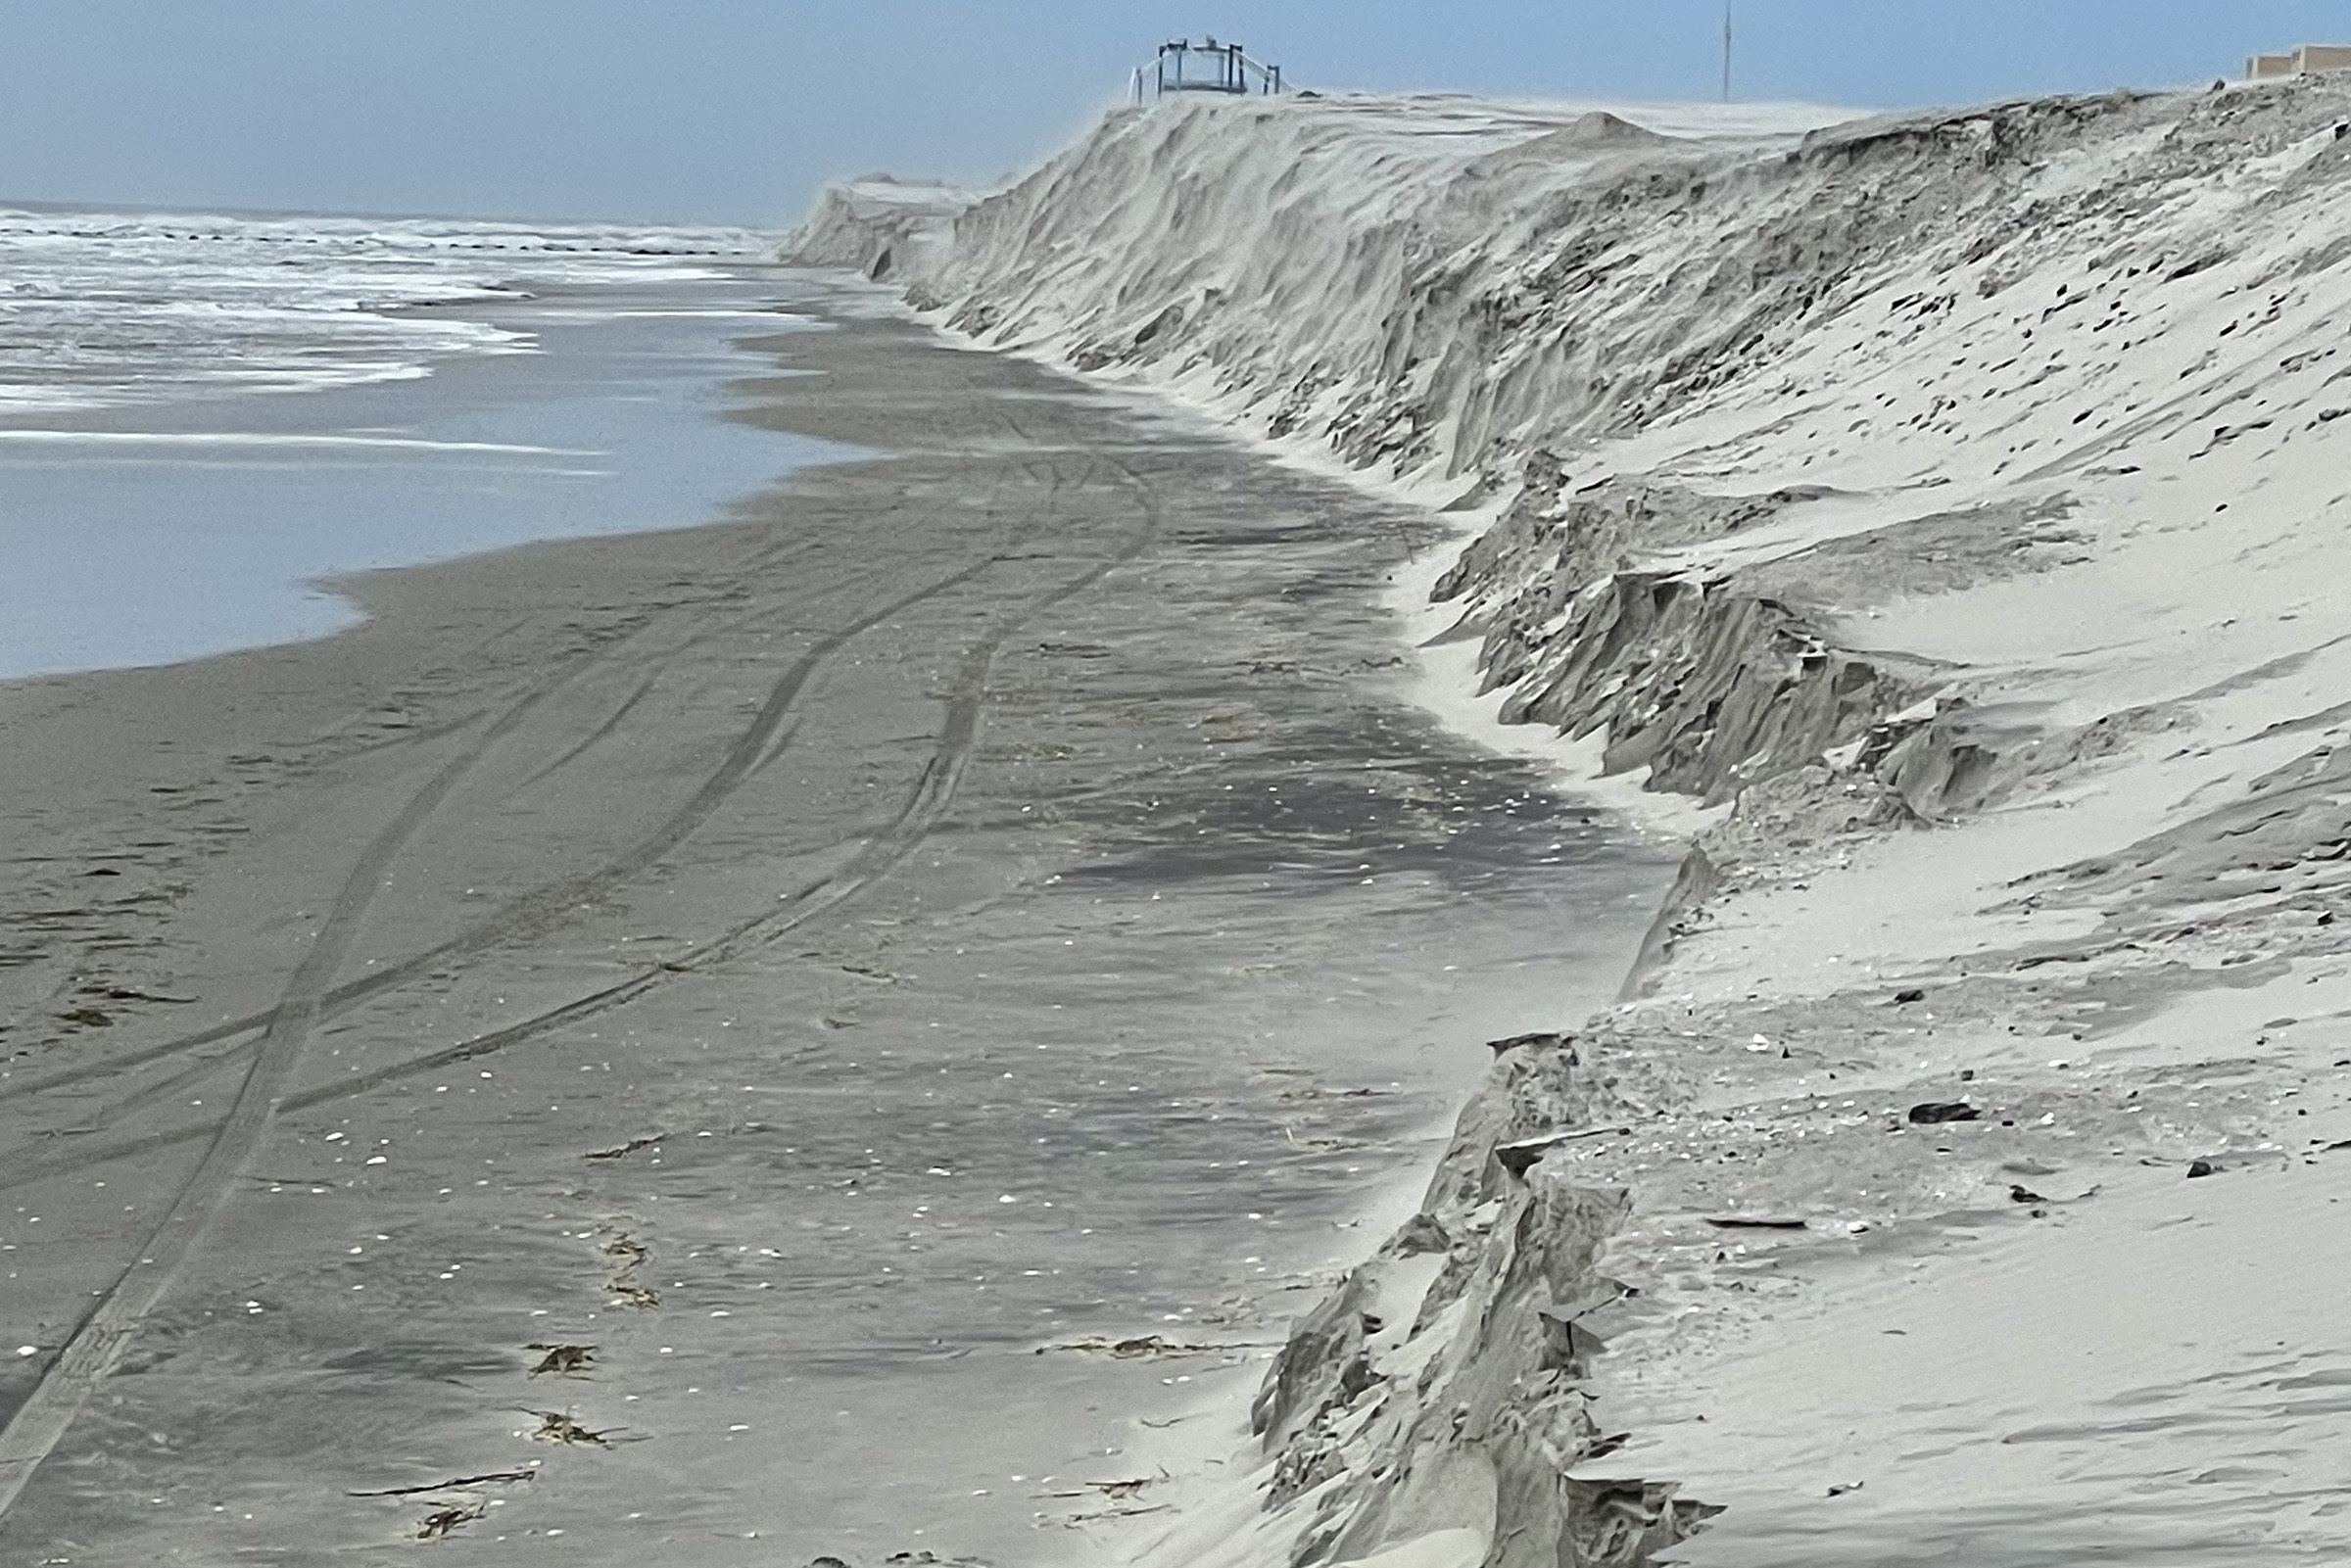 Storm washed away one-third of the sand meant to replenish North Wildwood beaches pic